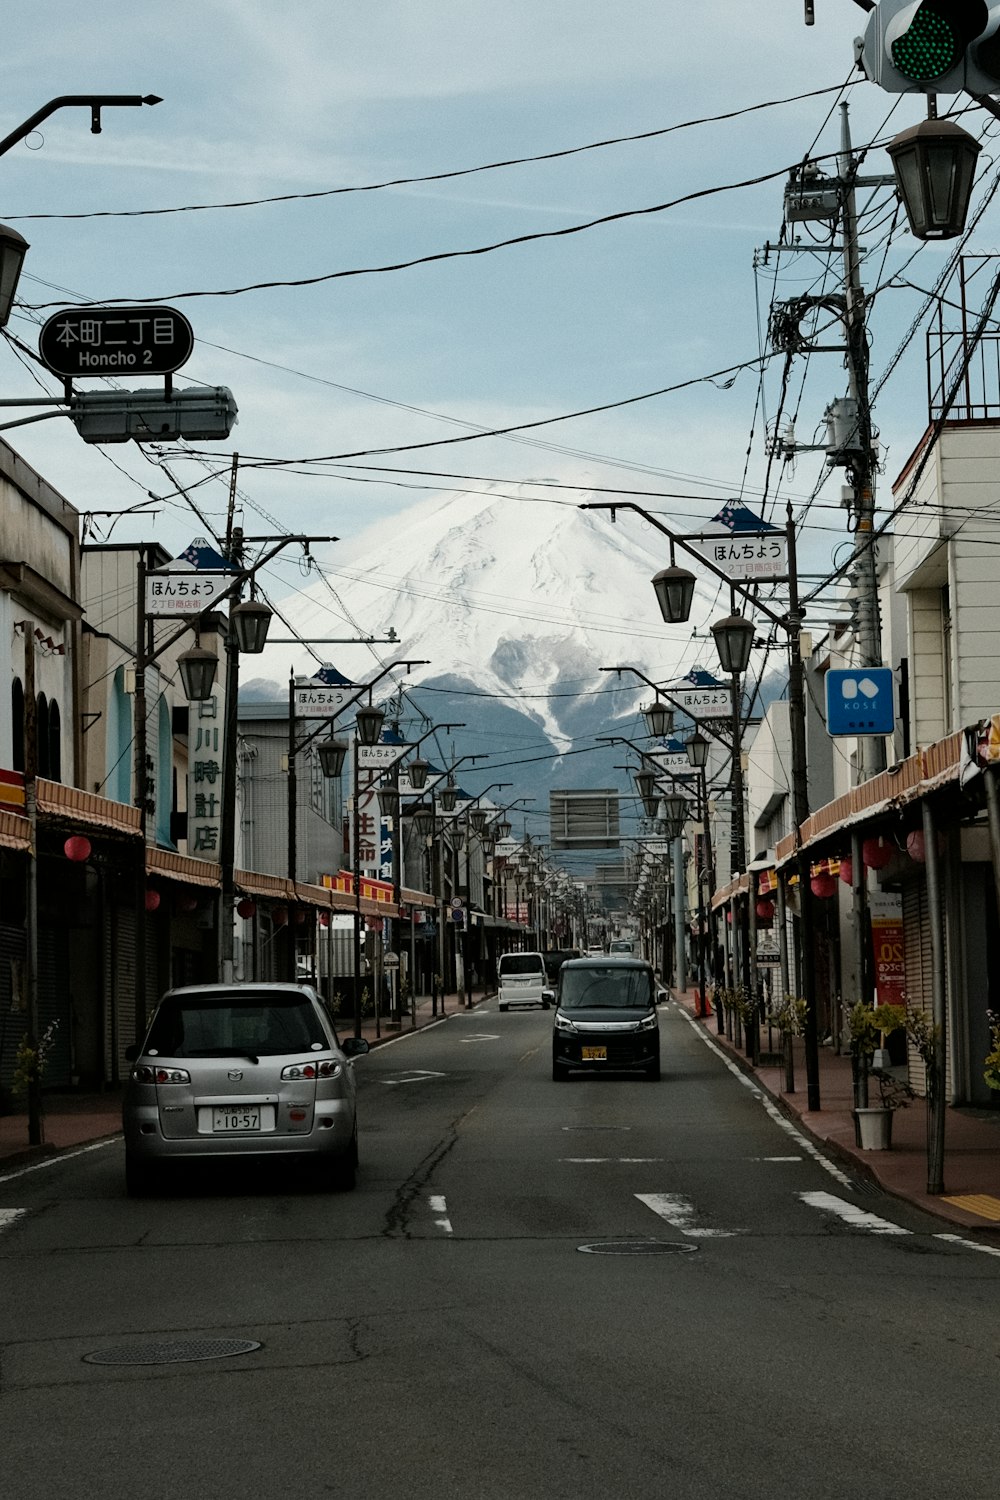 a car driving down a street with a mountain in the background